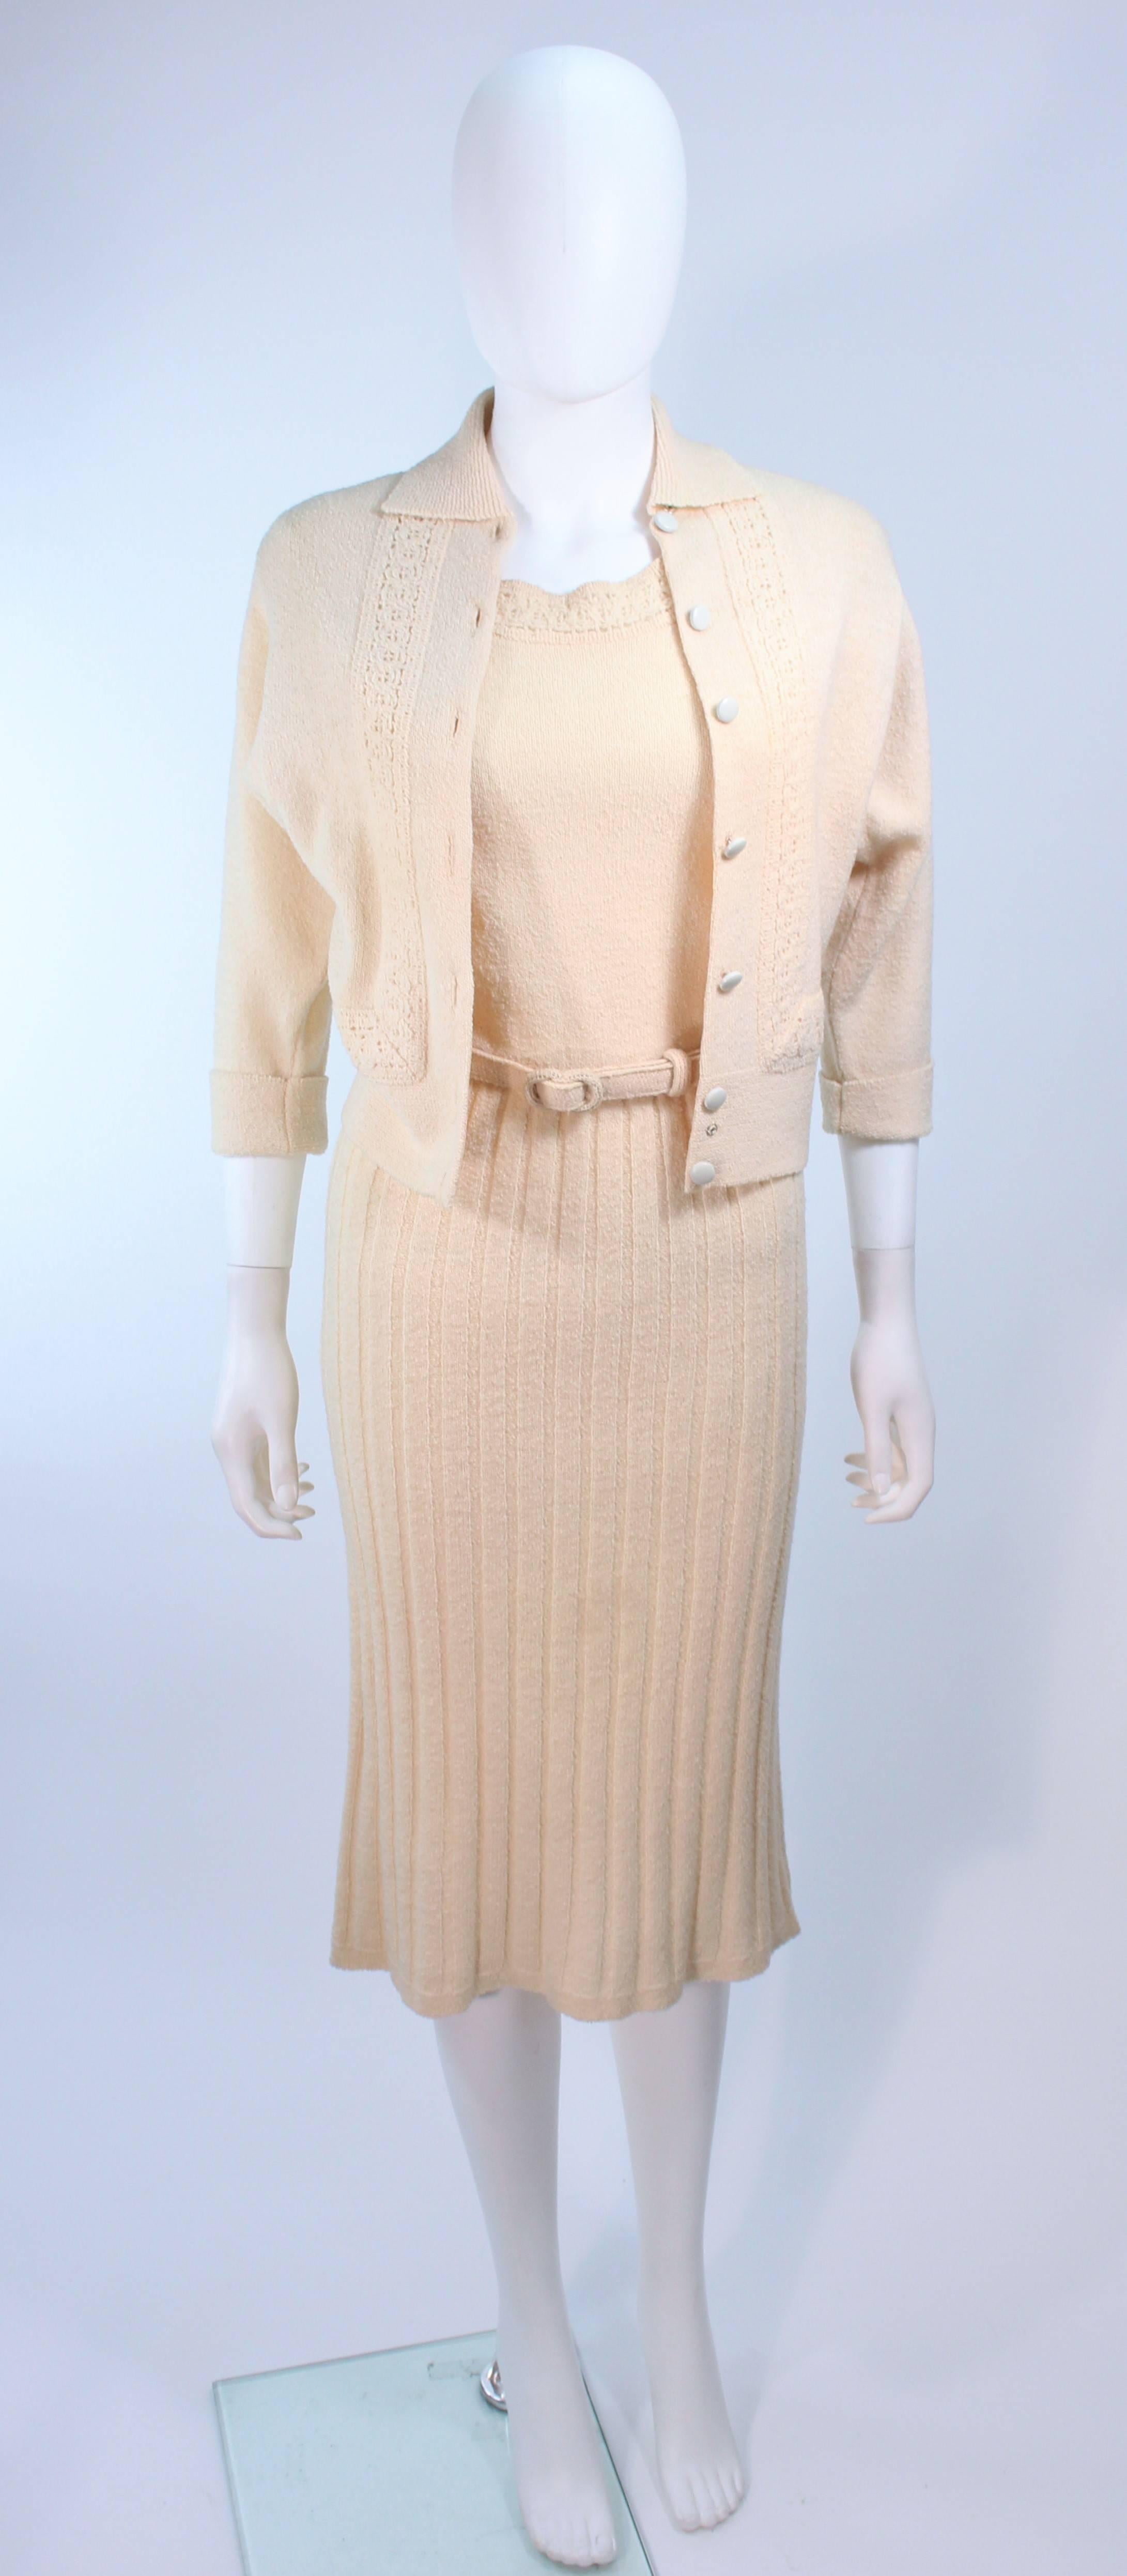 This ensemble is composed of an ivory stretch Zephyr wool . The sweater features center front button closures. Comes with belt. In excellent vintage condition.

**Please cross-reference measurements for personal accuracy. Size in description box